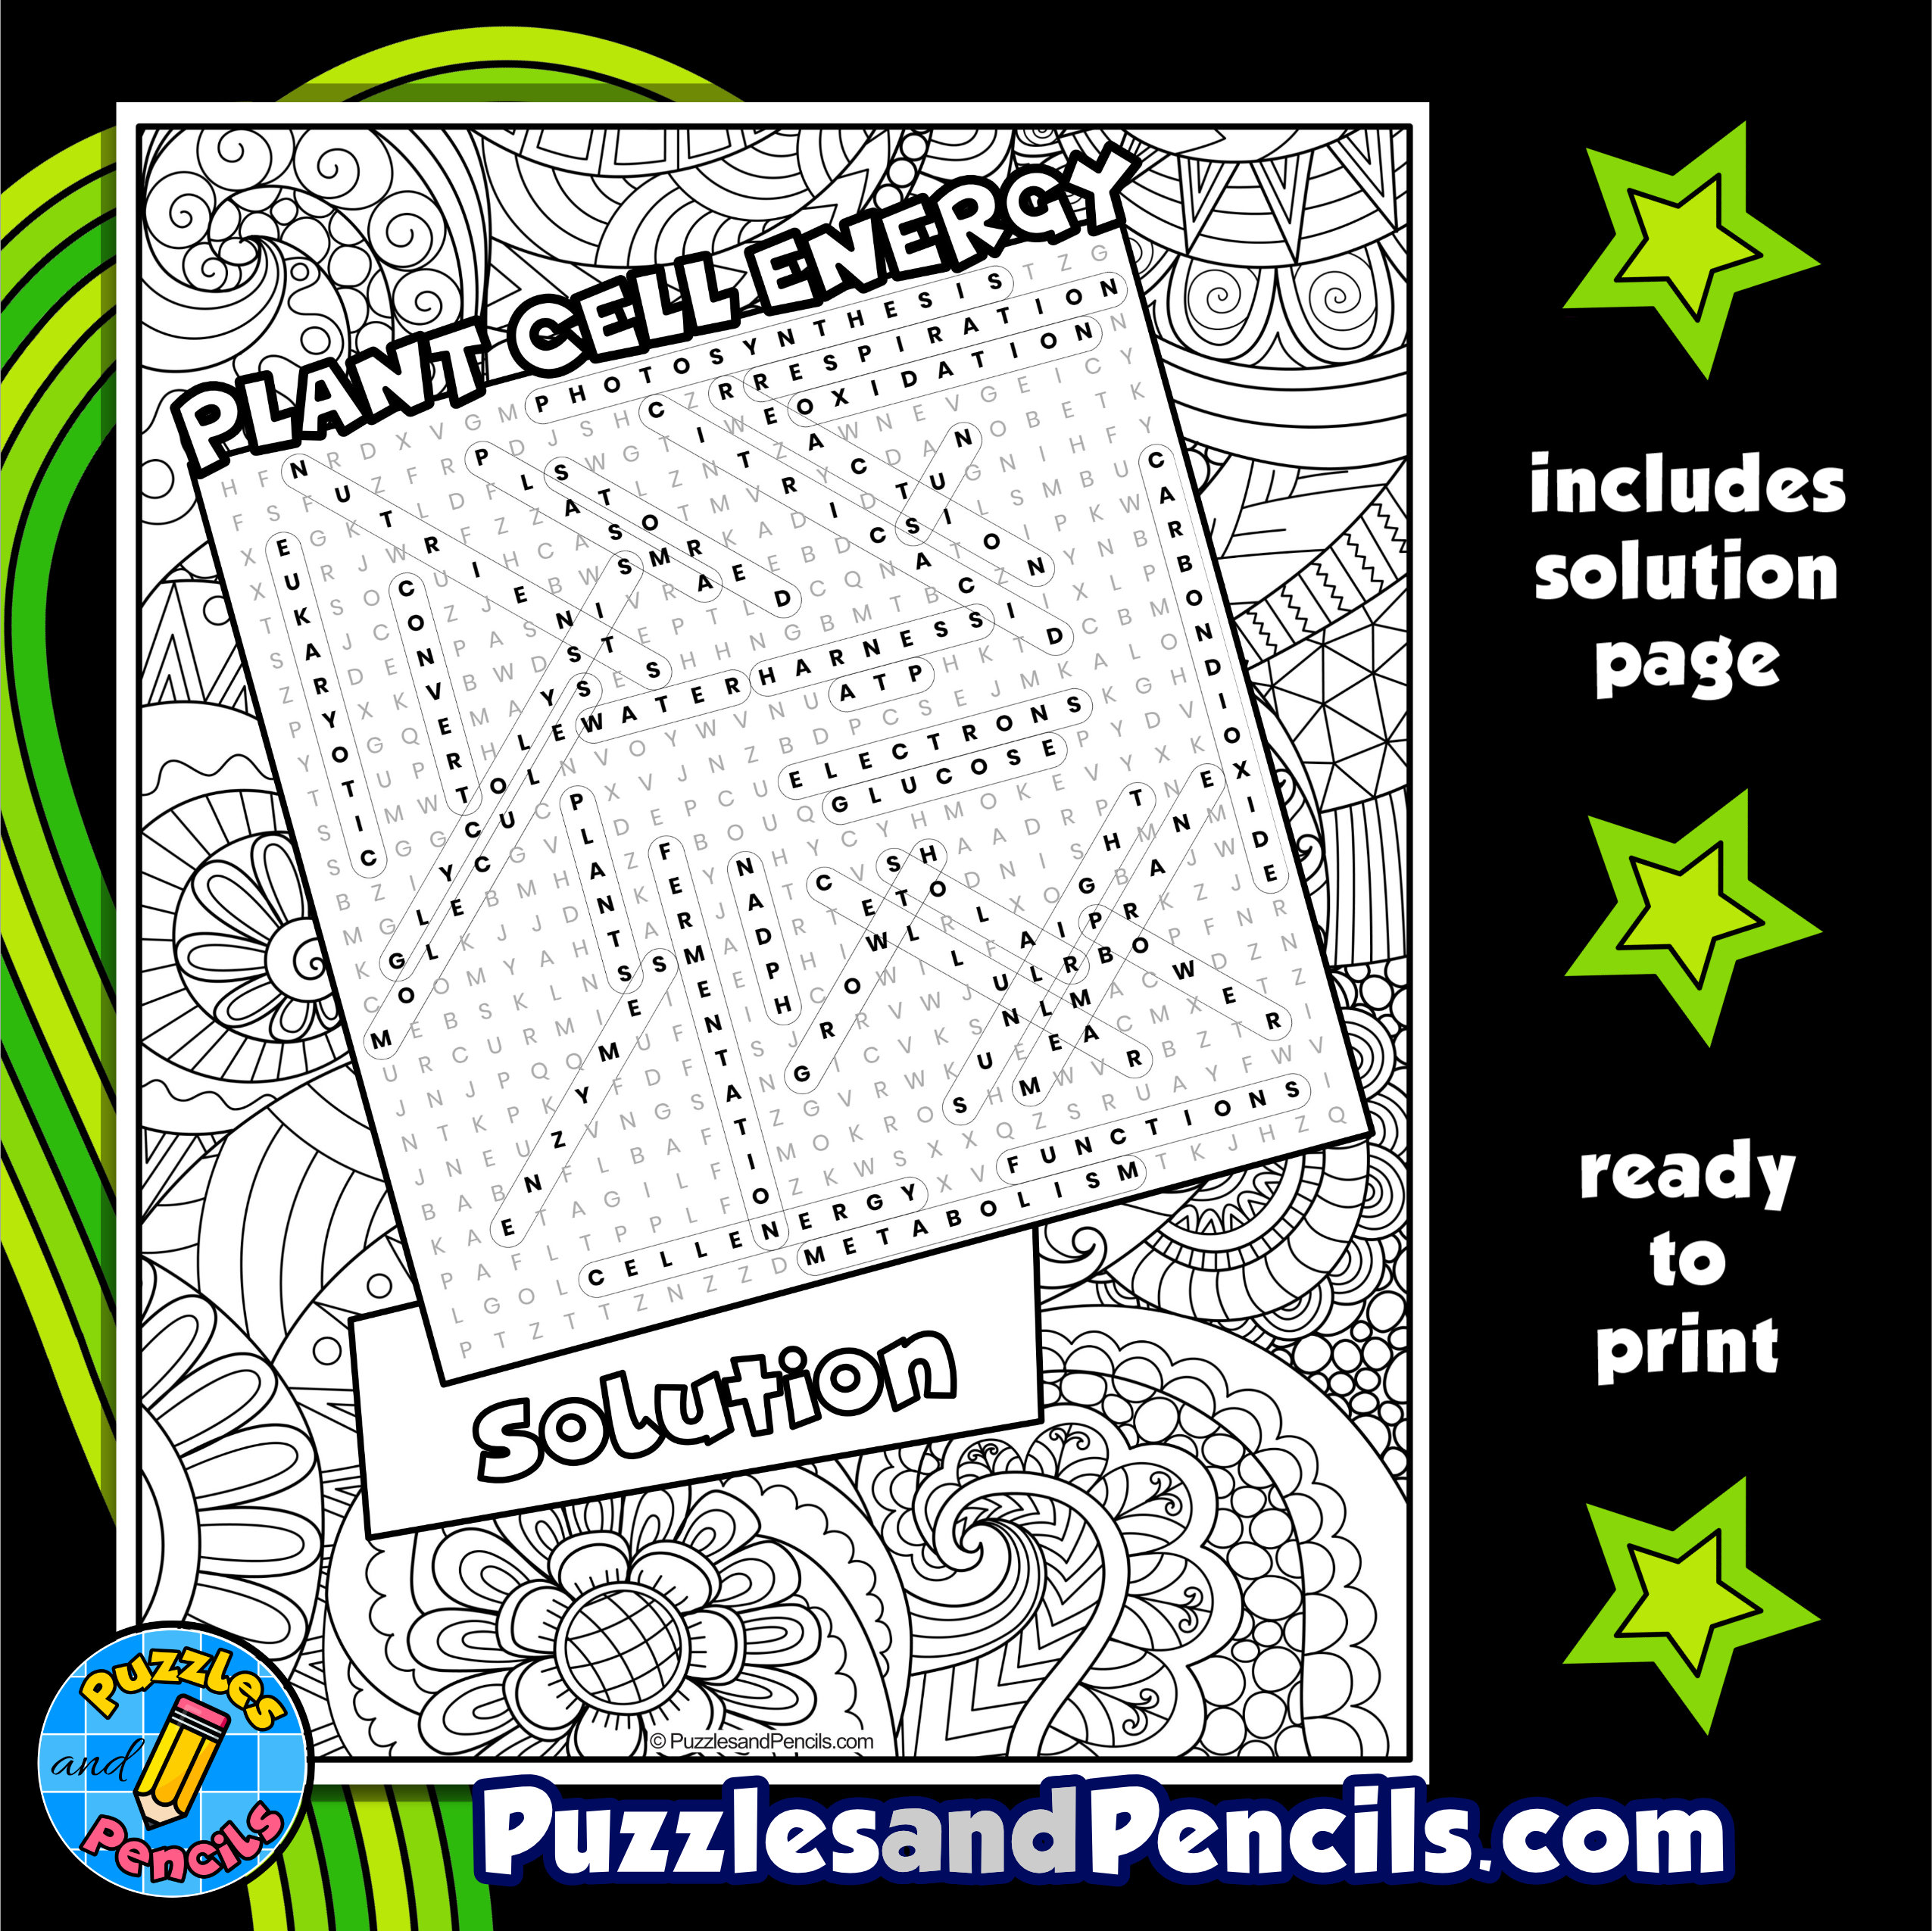 Plant cell energy word search puzzle with coloring plant biology wordsearch made by teachers